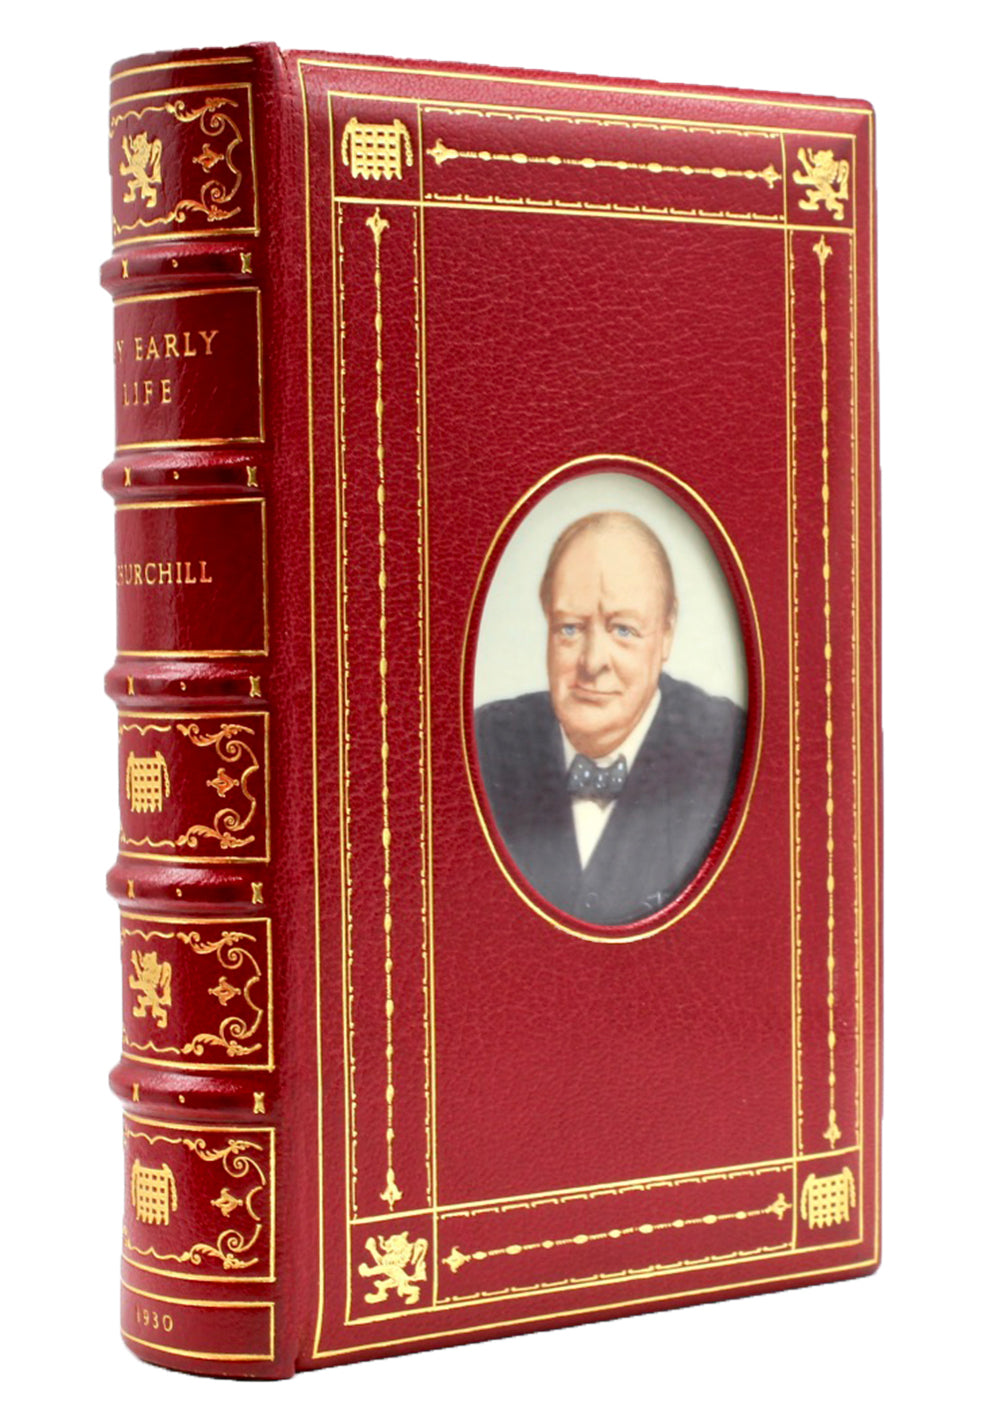 My Early Life by Winston Churchill, First Edition, in Cosway-style Asprey Binding, 1930